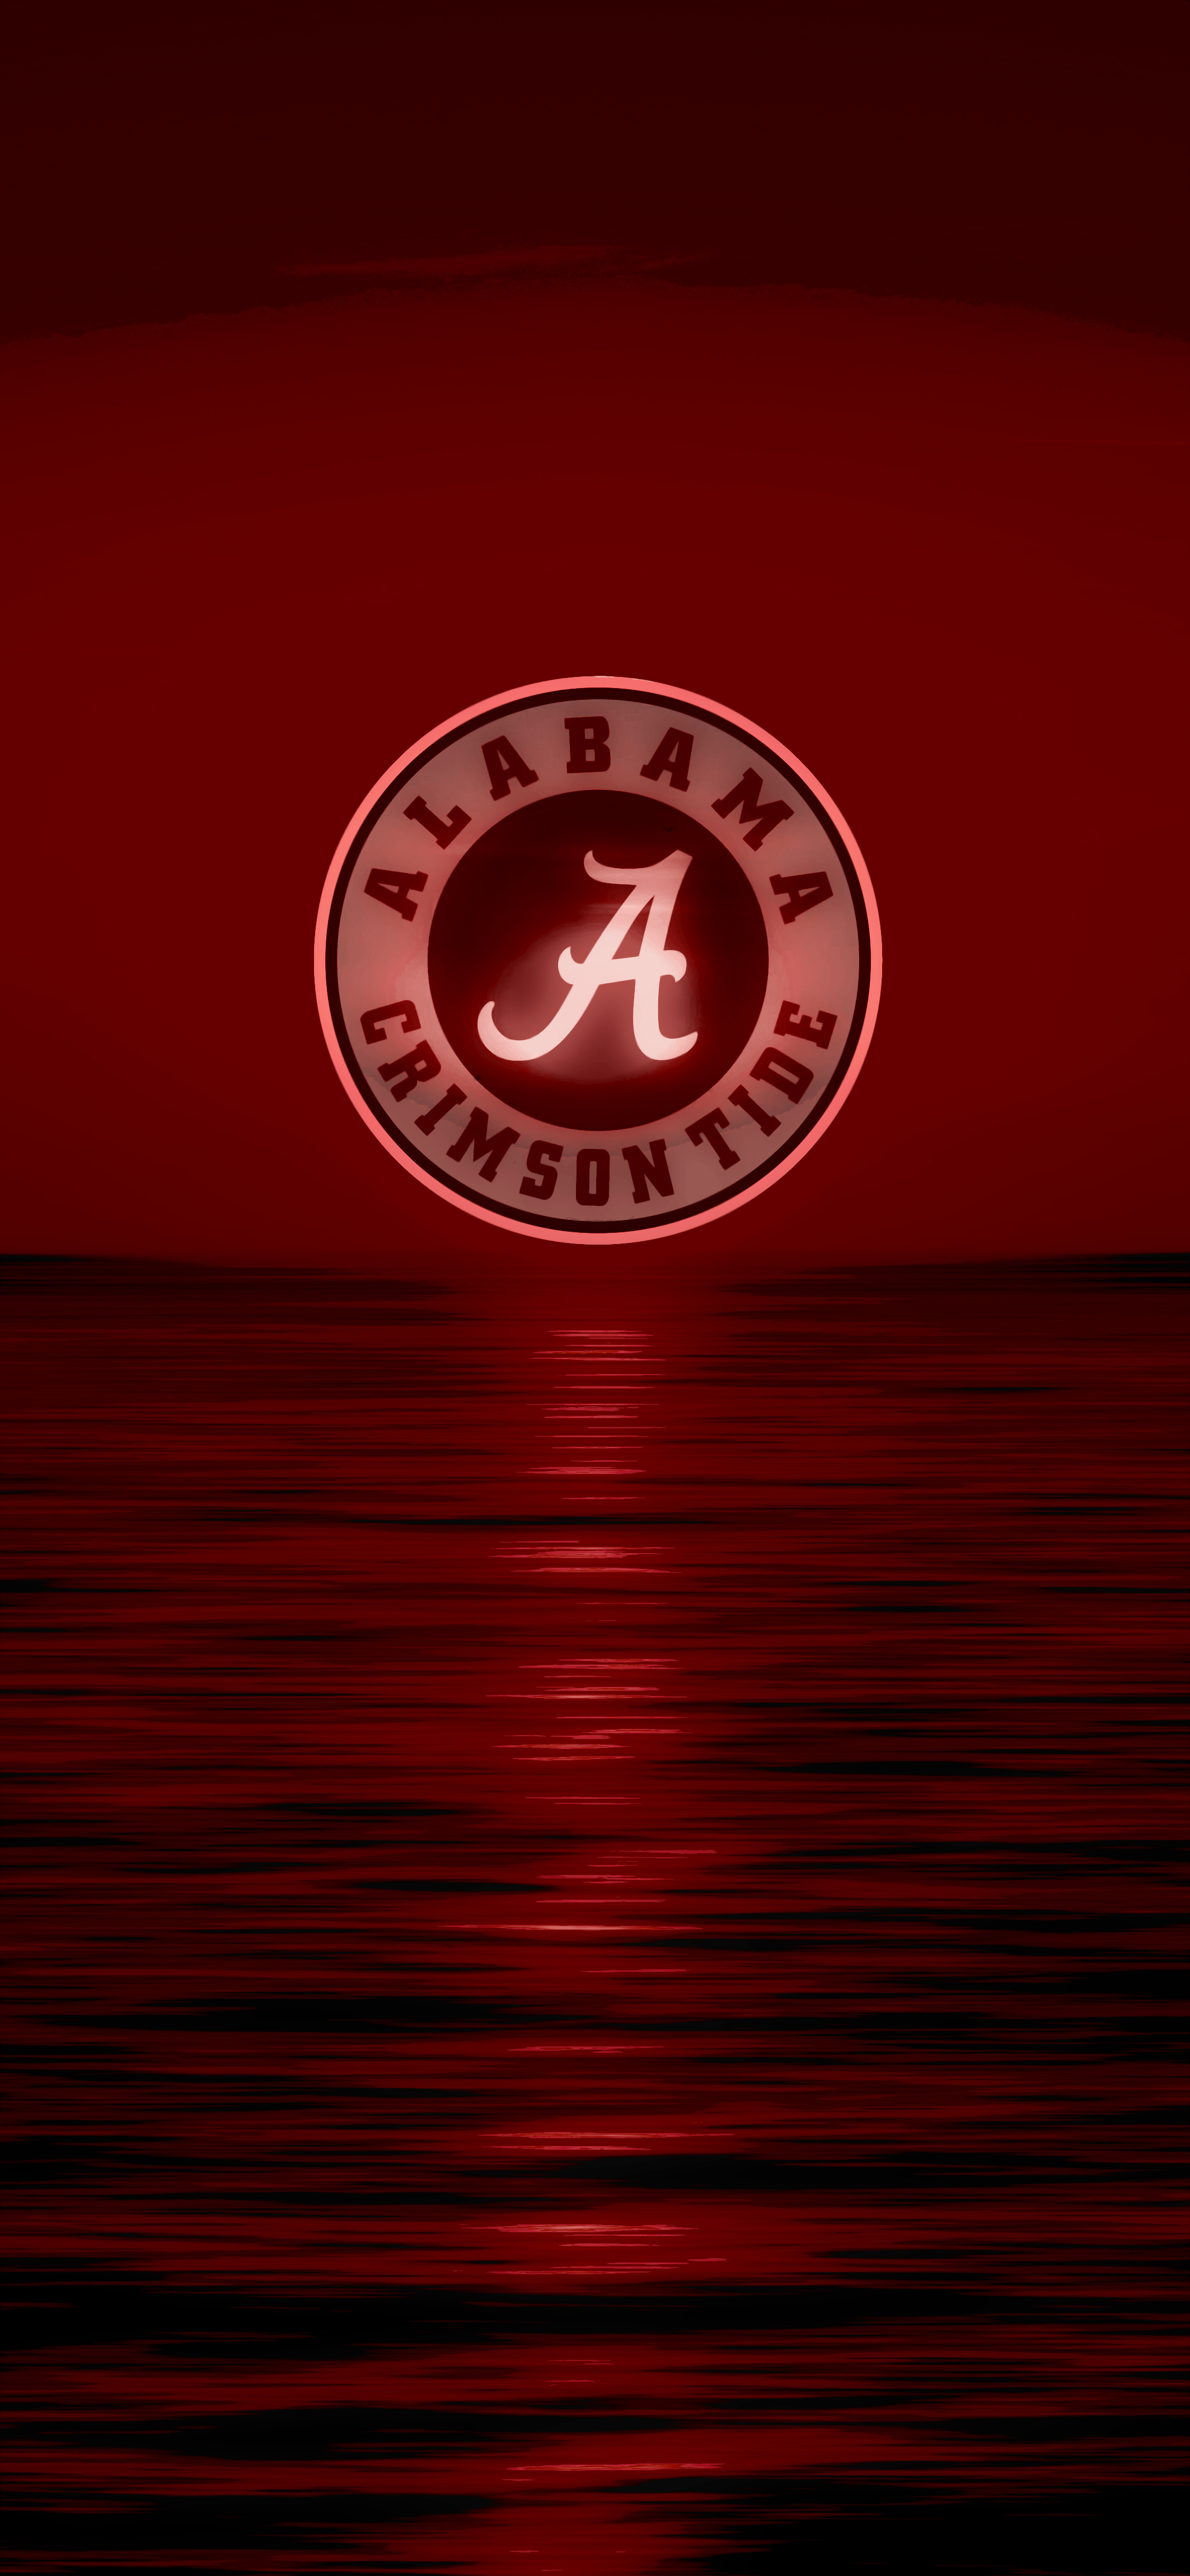 Alabama Crimson Tide iPhone Wallpaper with high-resolution 1080x1920 pixel. You can use this wallpaper for your iPhone 5, 6, 7, 8, X, XS, XR backgrounds, Mobile Screensaver, or iPad Lock Screen - Crimson